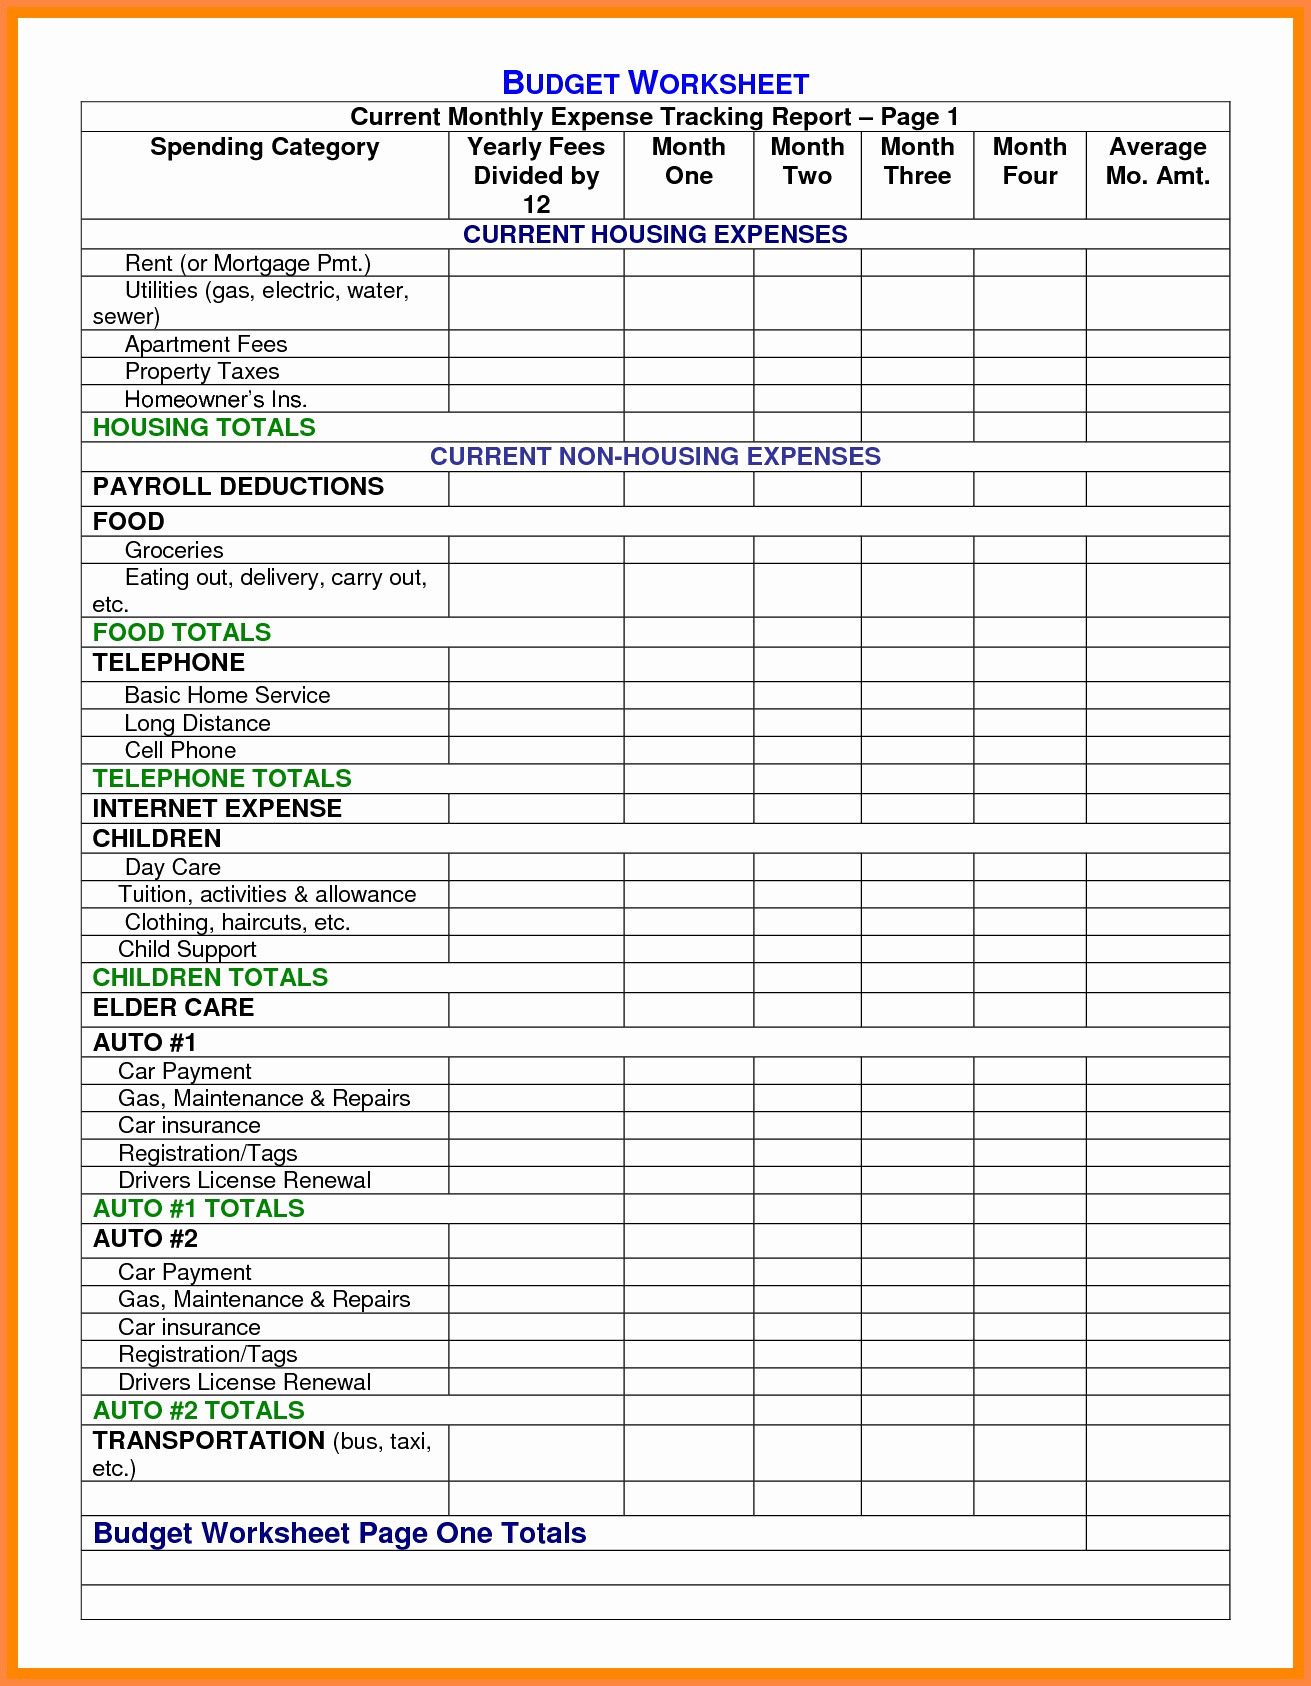 Material List For Building A House Spreadsheet —